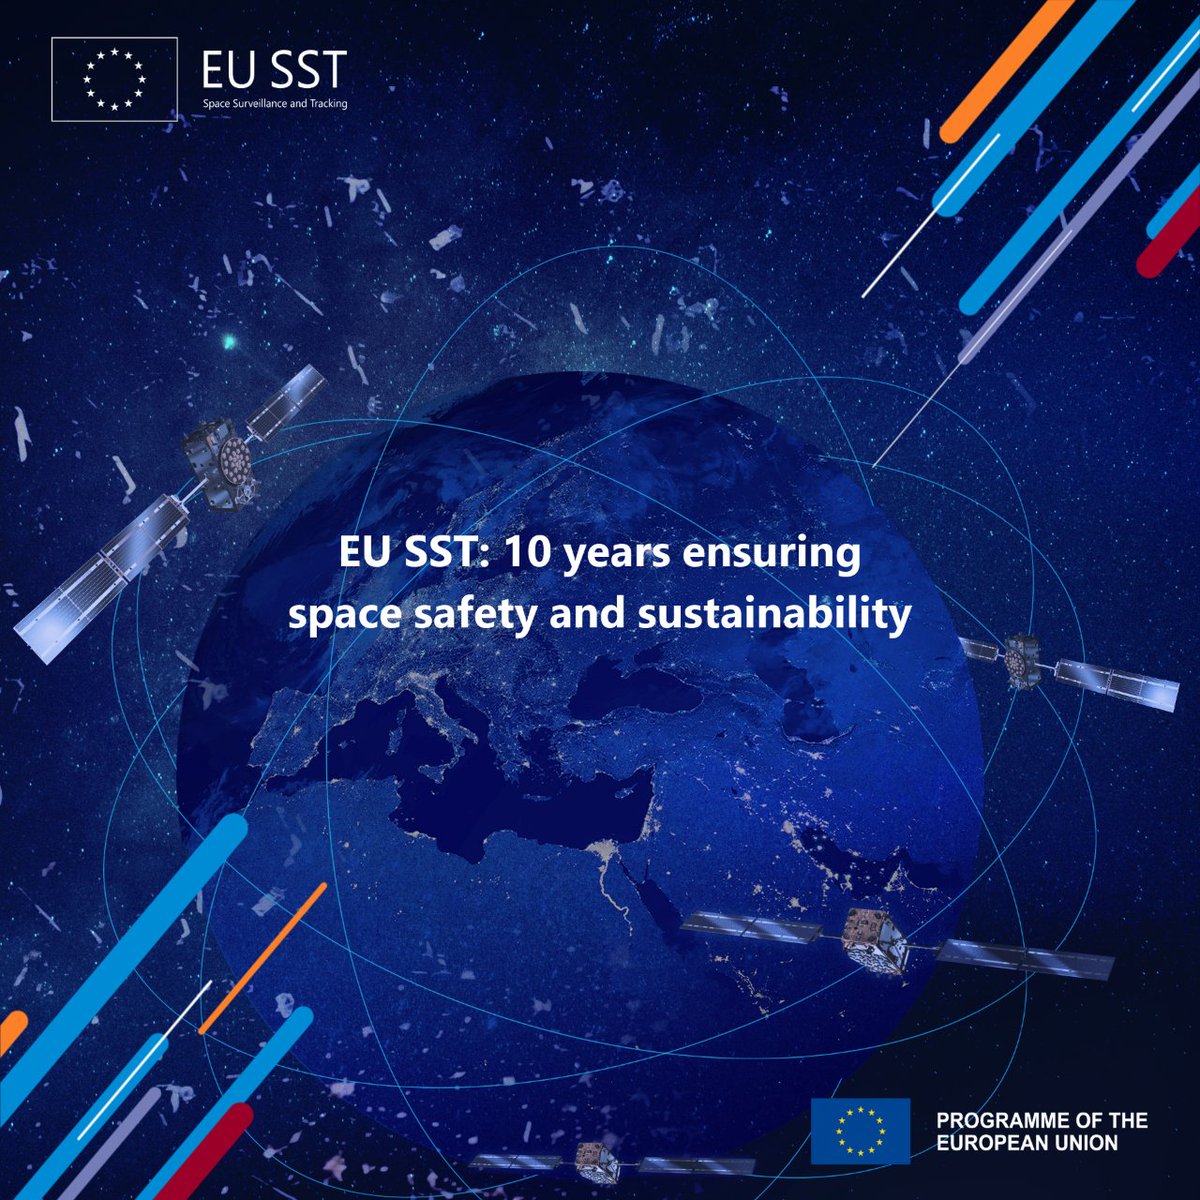 Today we mark 10 years of the publication of the Decision 541/2014/EU establishing a space surveillance and tracking support framework.  #EUSST is now part of the #EUSpace Programme and continues ensuring the safety and sustainability of space operations: eusst.eu/about-us